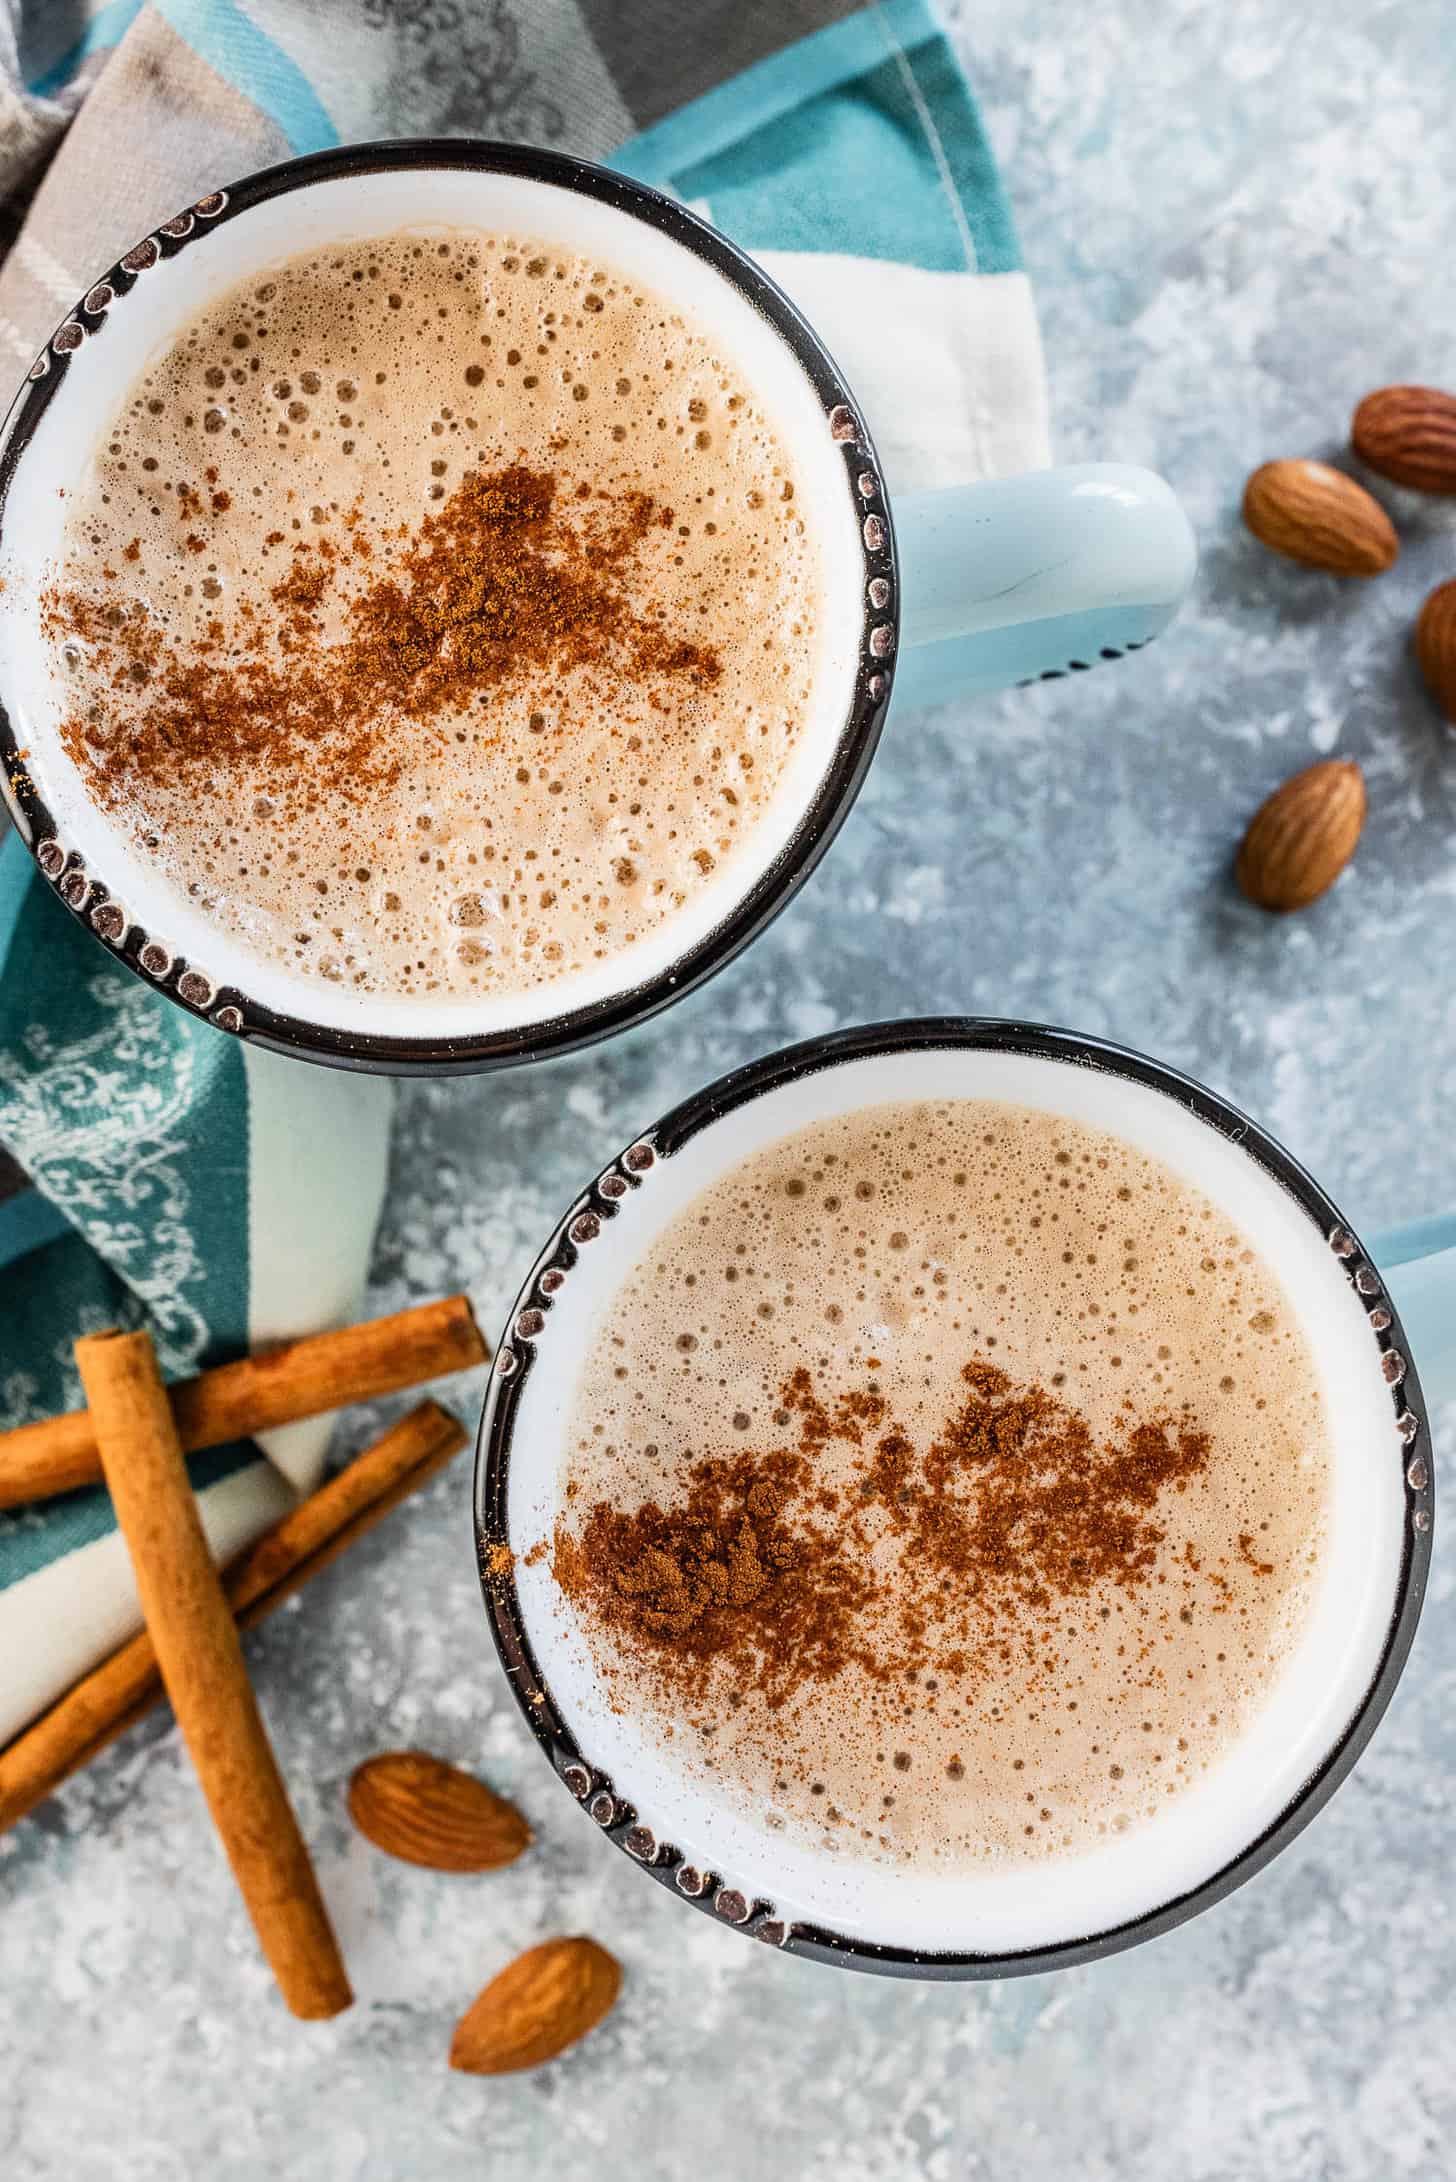 Two mugs filled with Almond Butter Latte and a sprinkle of cinnamon on top.